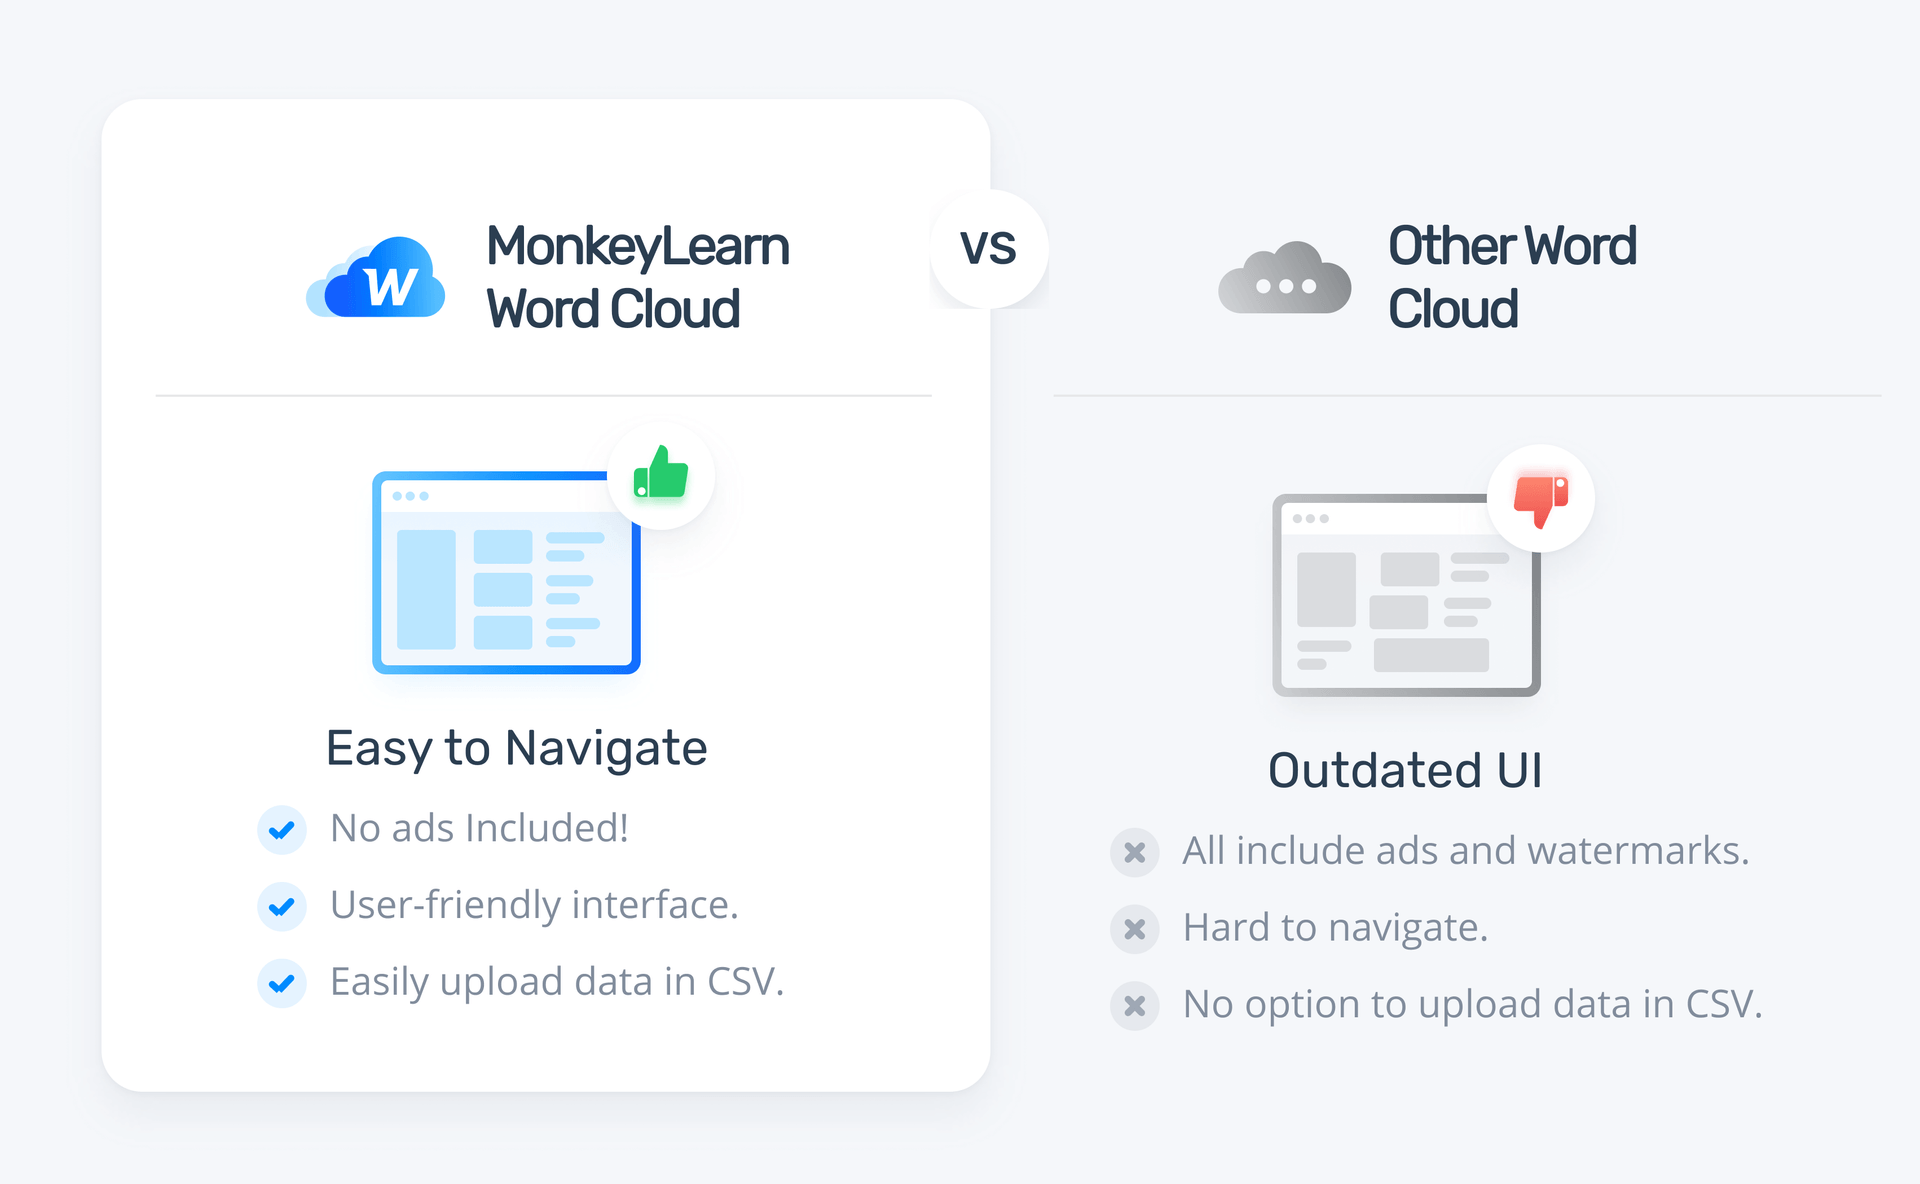 MonkeyLearn's easy navigation vs other word clouds that are hard to navigate